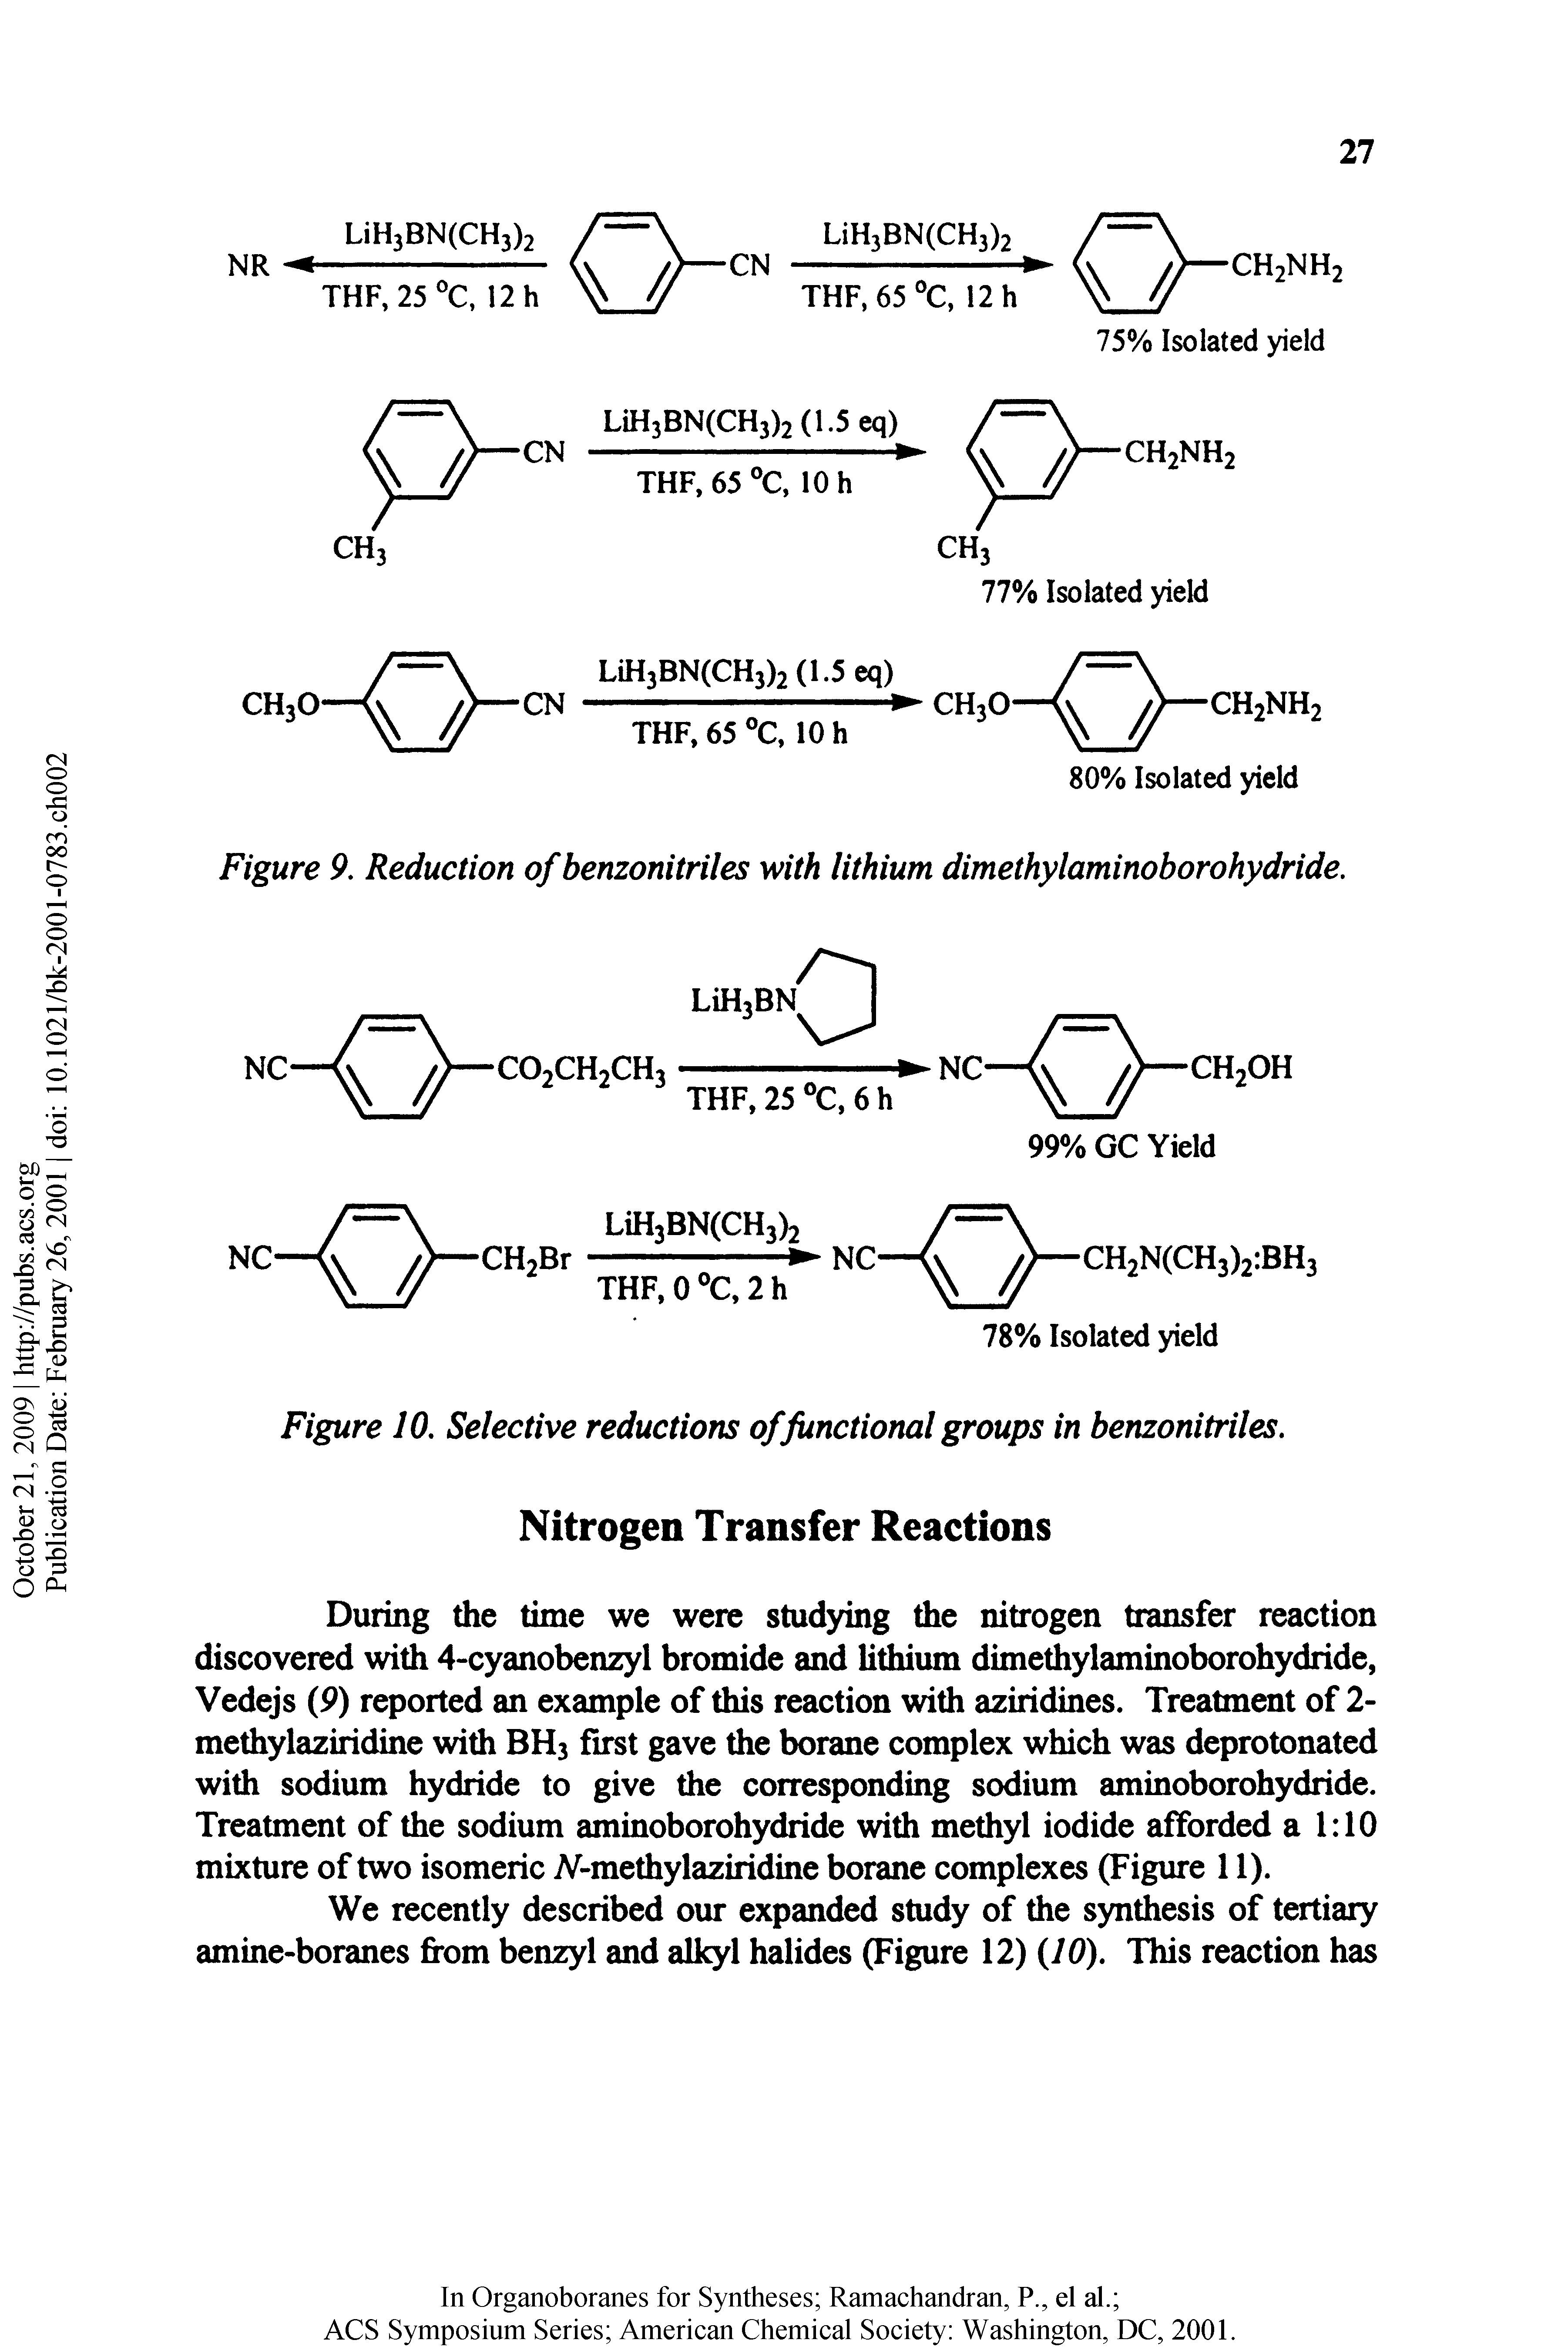 Figure 10, Selective reductions of functional groups in benzonitriles.